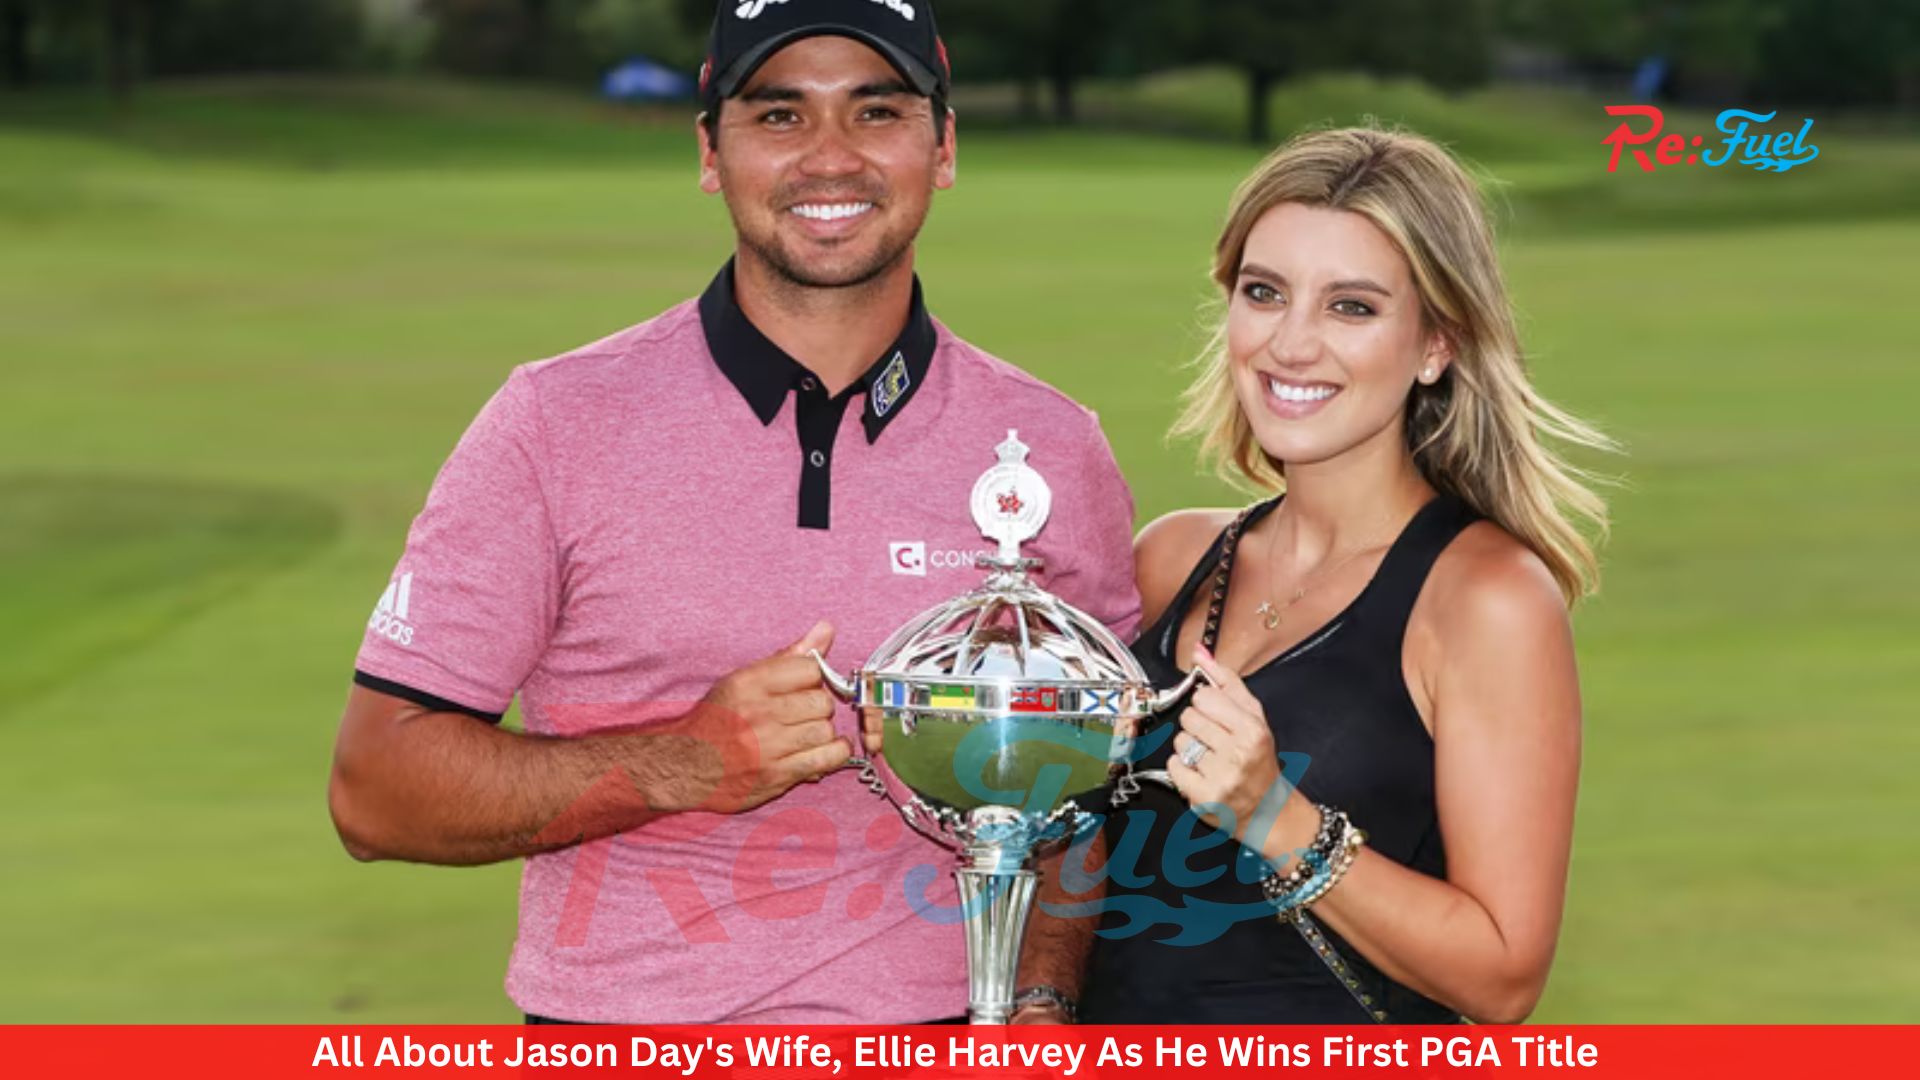 All About Jason Day's Wife, Ellie Harvey As He Wins First PGA Title